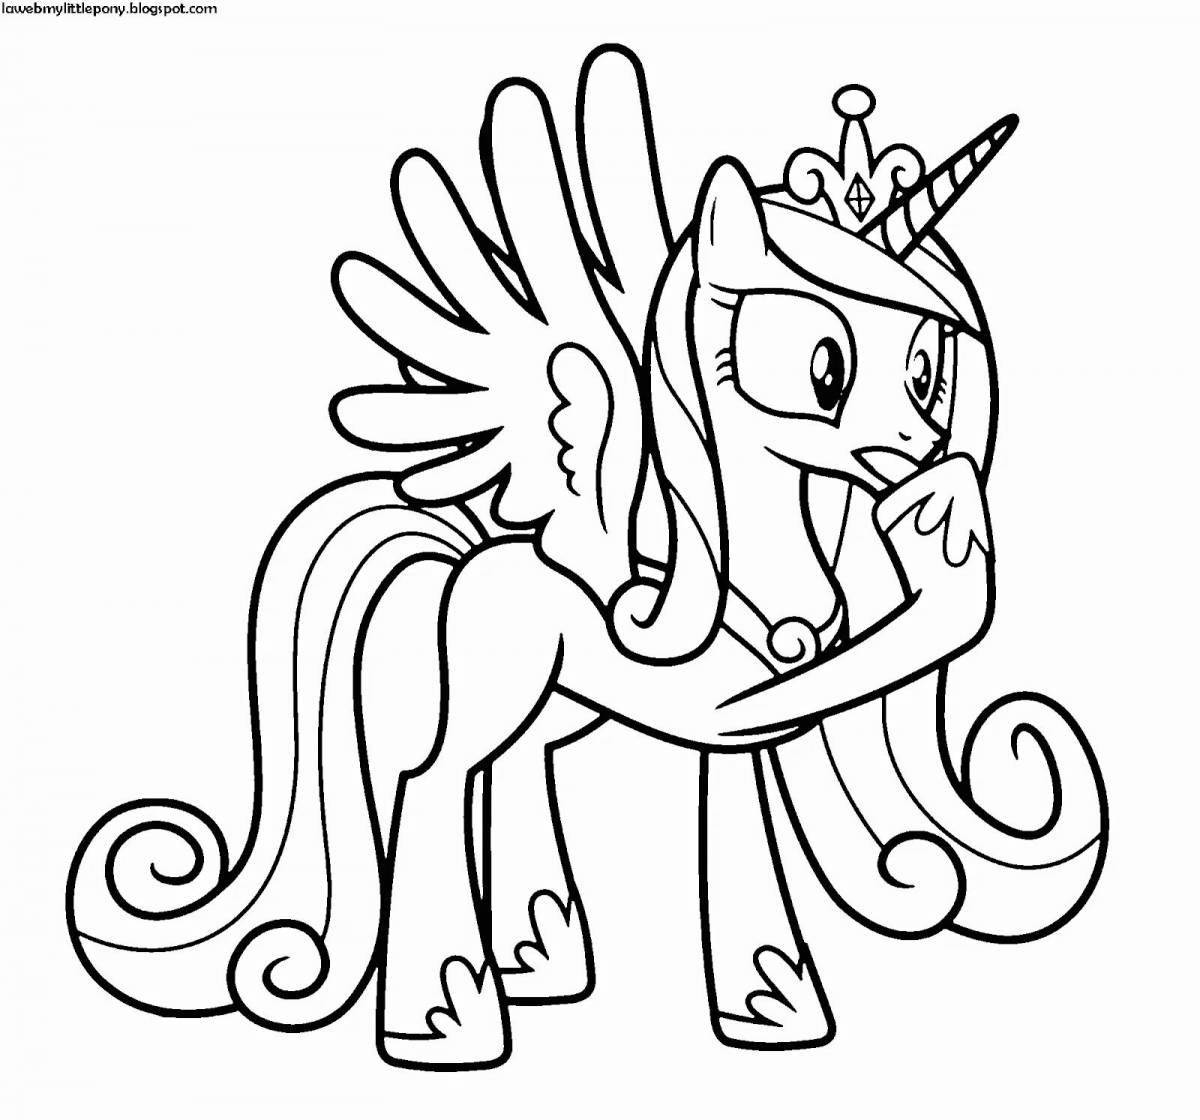 Dazzling cadence pony coloring page